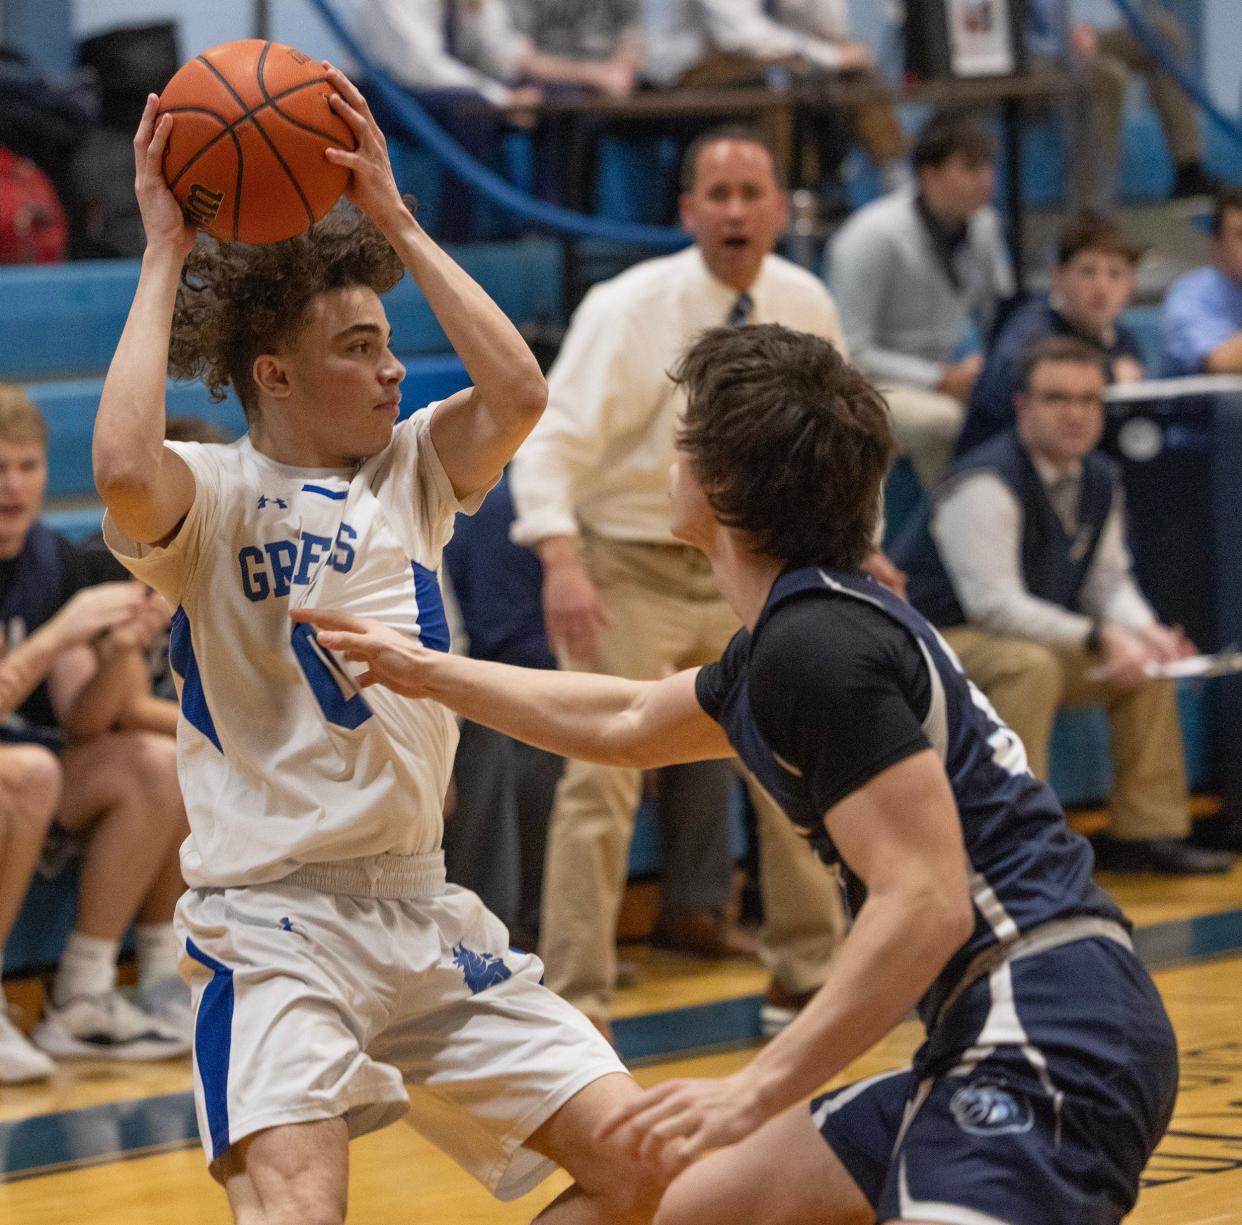 Donovan’s Ryan Jacobs tries to set up a play as he’s closely covered by CBA Peter Noble in first half action. Christian Brothers Academy Basketball defeats Donovan Catholic in Shore Conference Tournament play in Middletown on February 8, 2024.